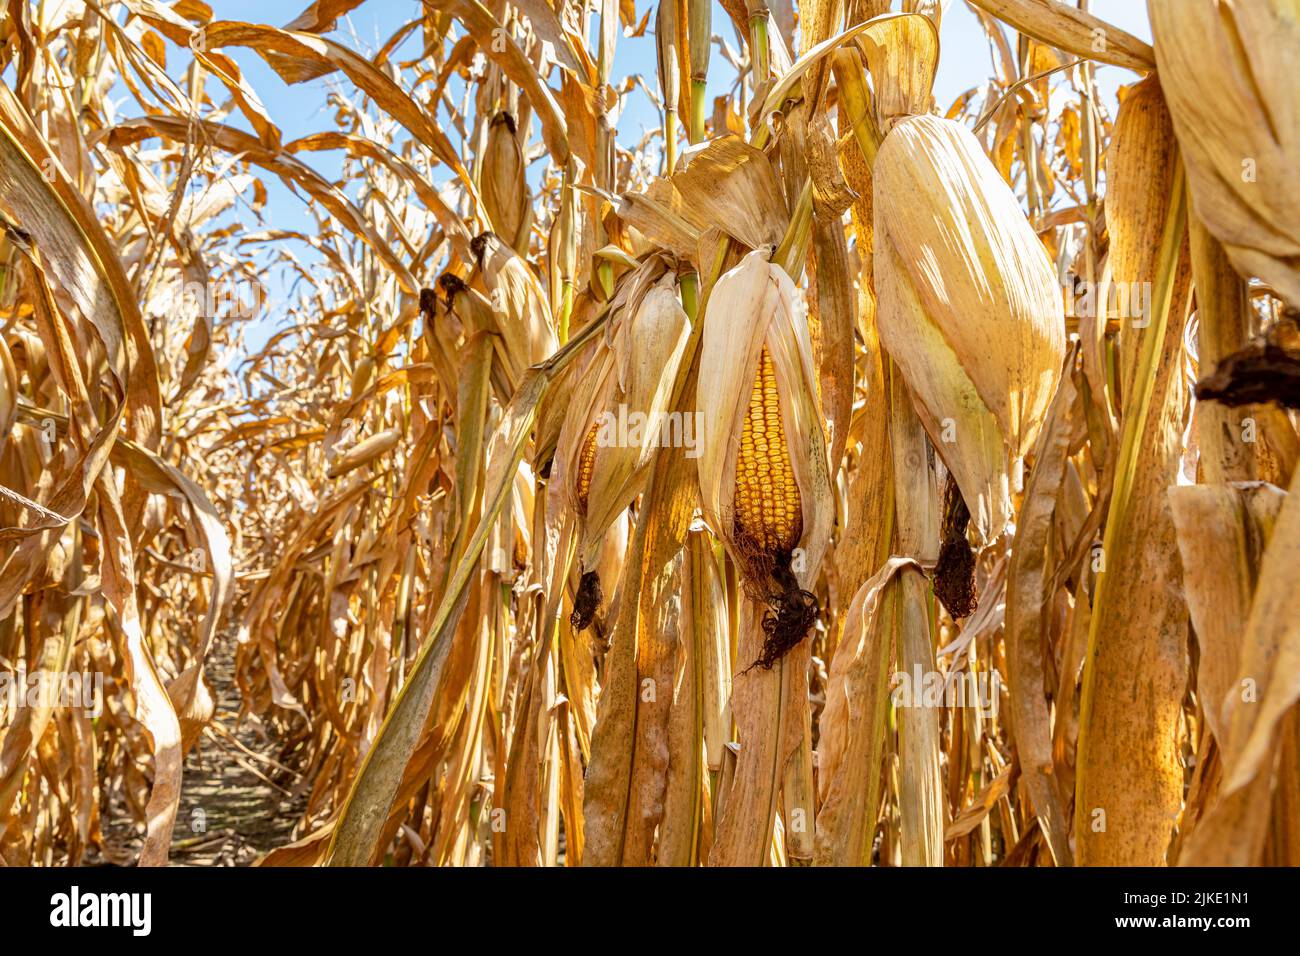 Ear of corn in cornfield ready for harvest. Harvest season, farming, agriculture, and ethanol concept. Stock Photo